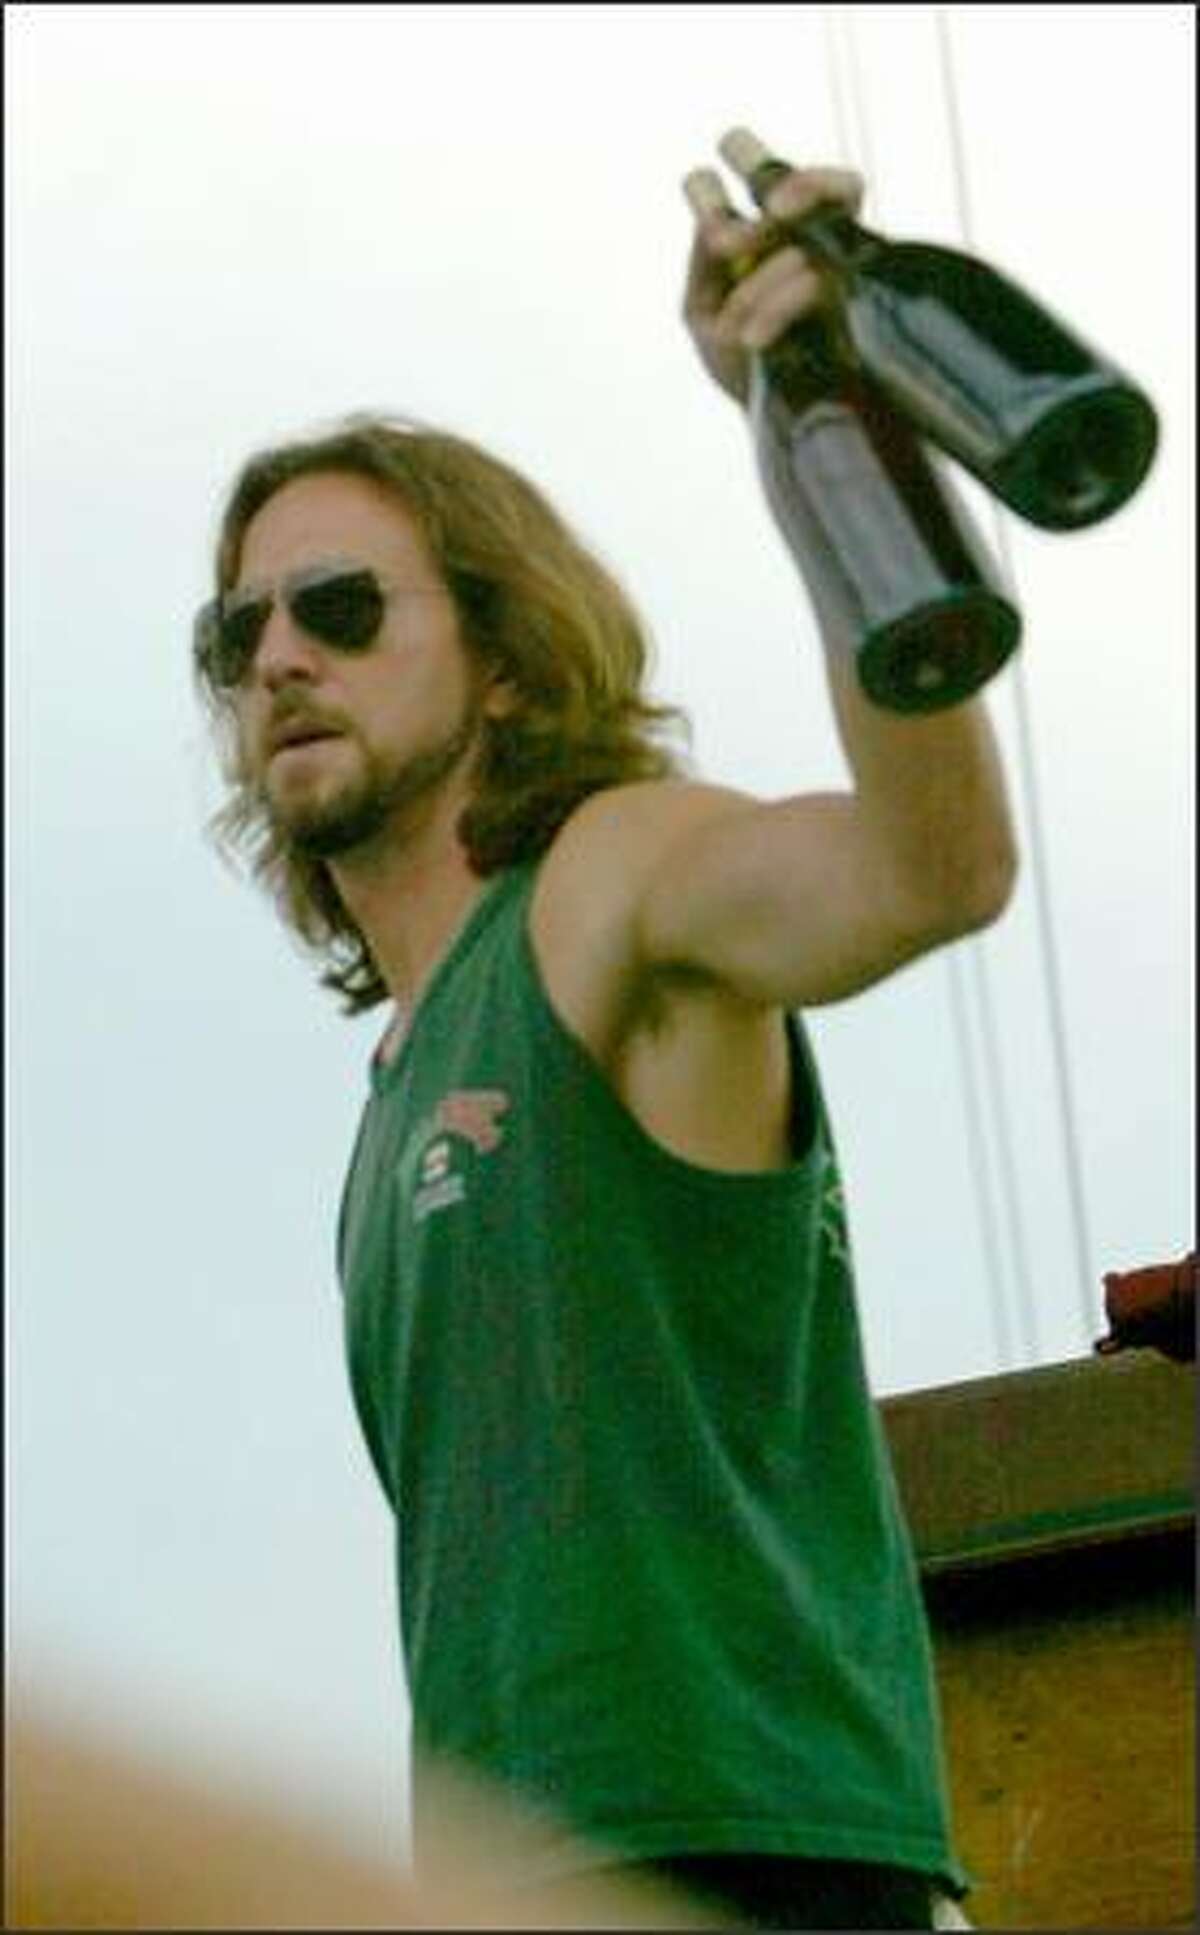 Eddie Vedder comes on stage with a little liquid to combat the heat during his performance.